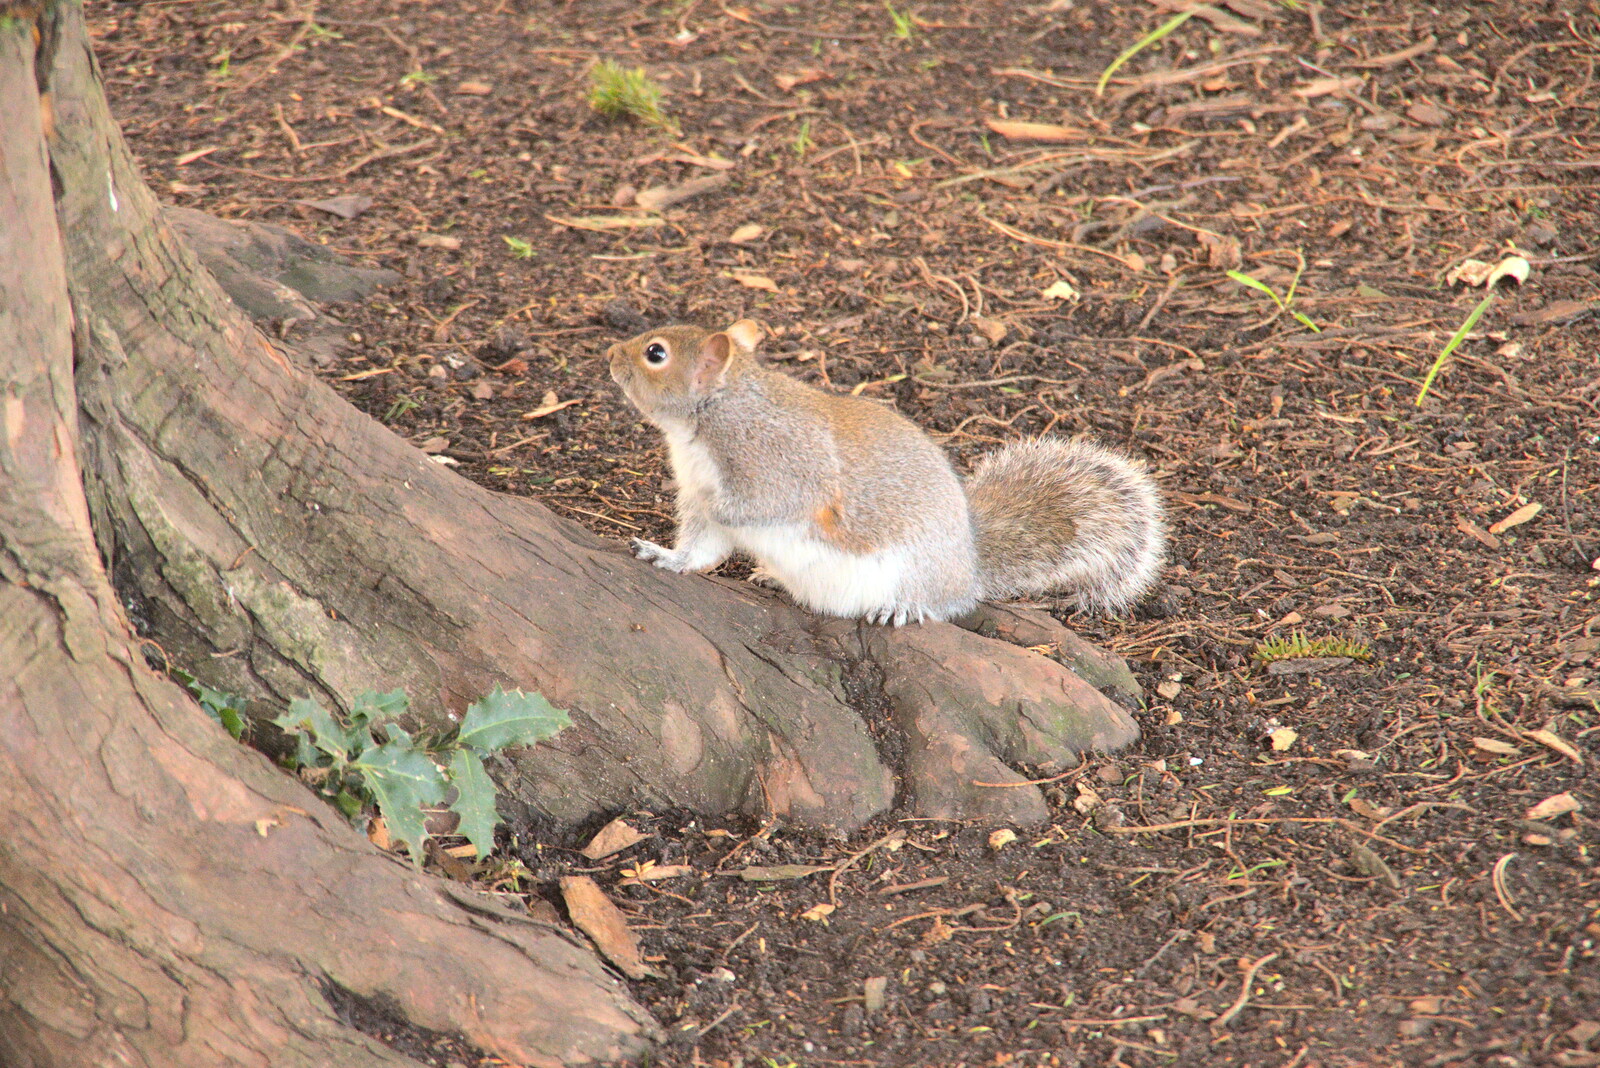 A wide-eyed squirrel runs around from A Few Hours in Bury St. Edmunds, Suffolk - 3rd January 2022